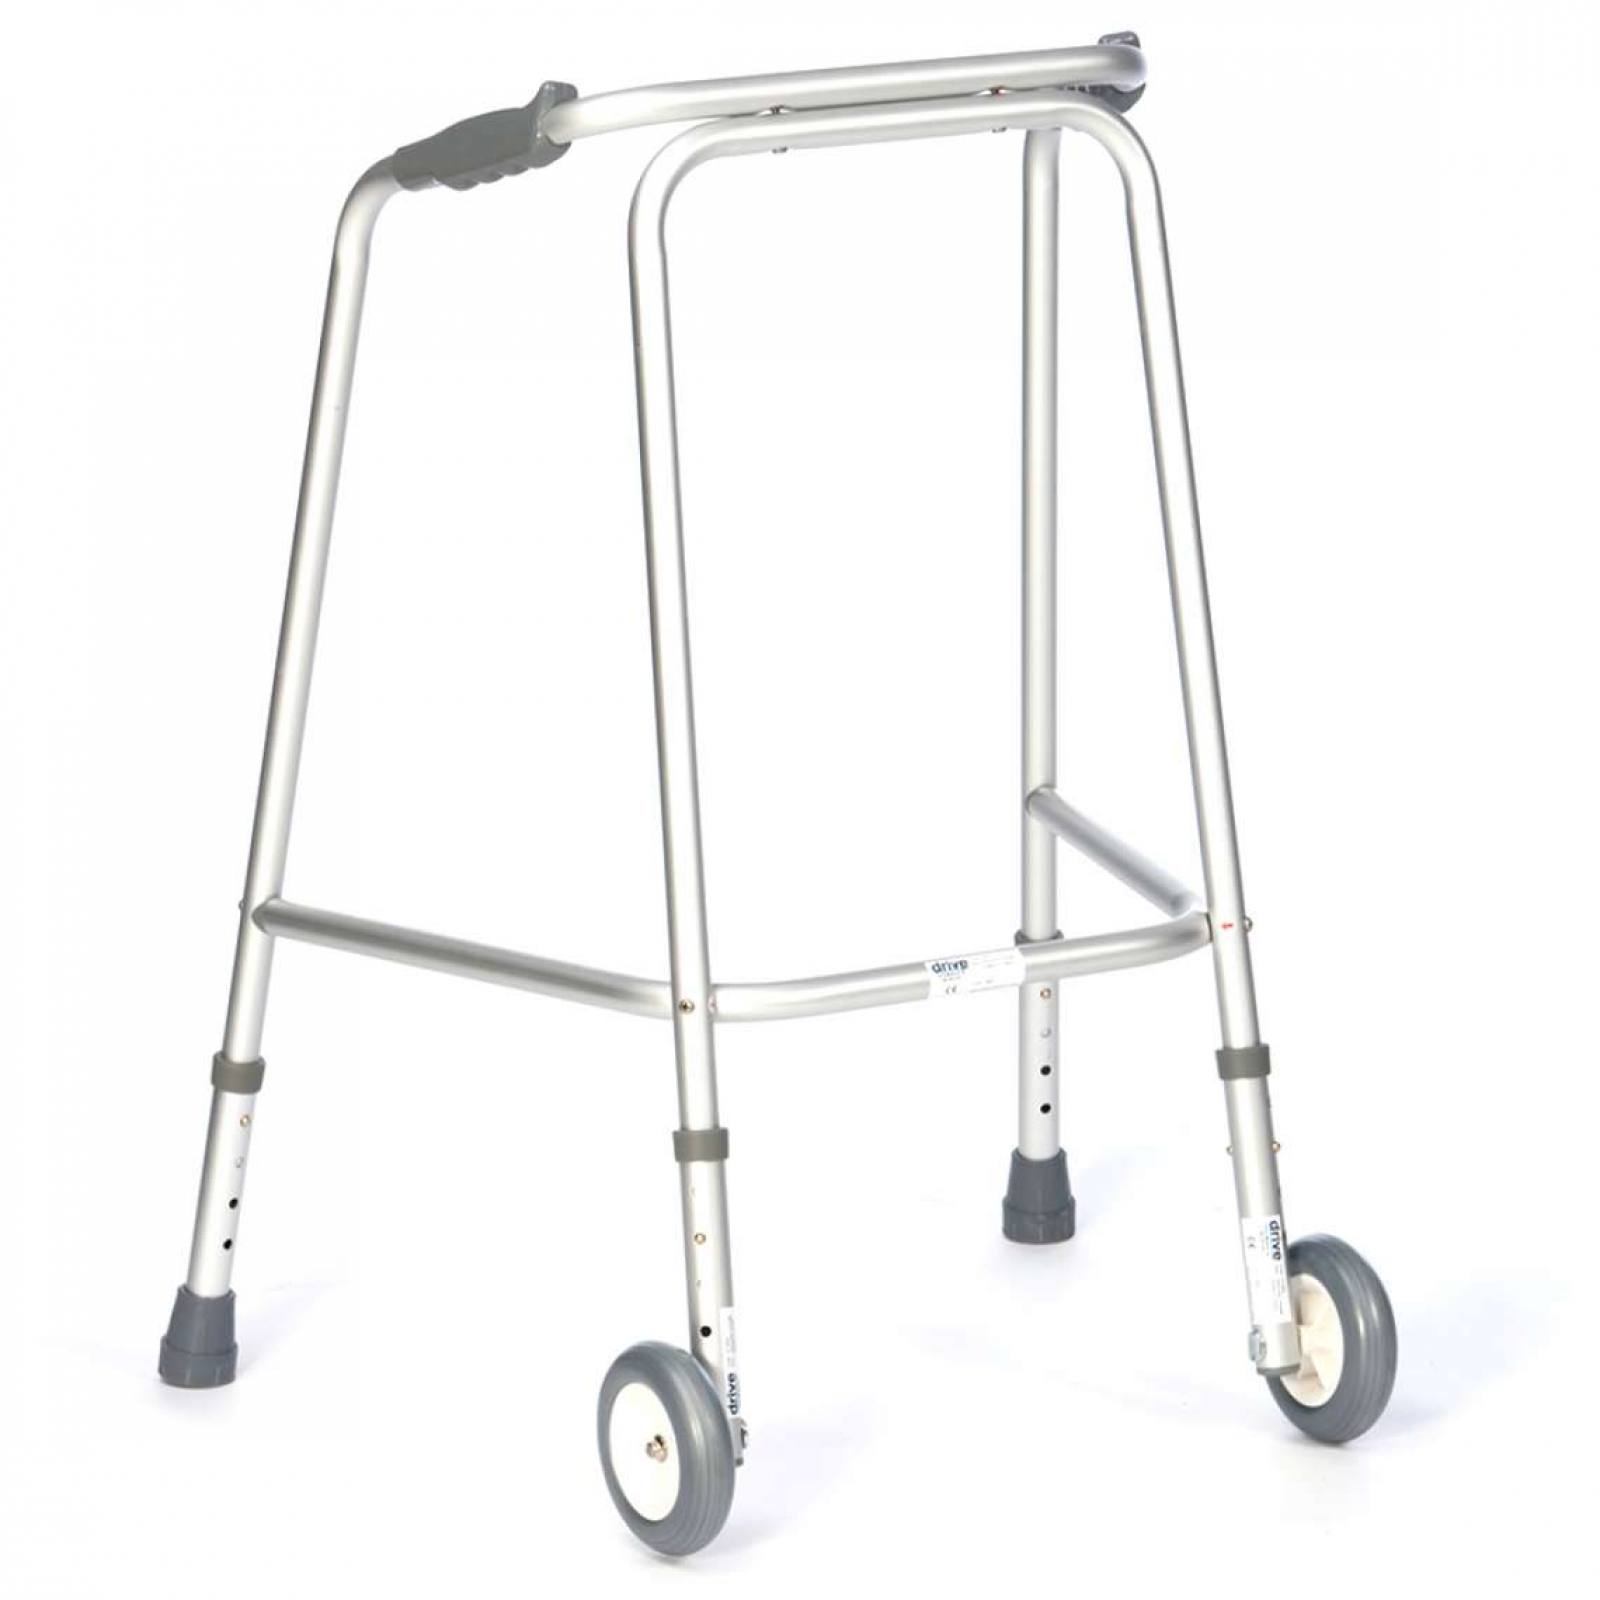 Domestic Walking Frame with wheels